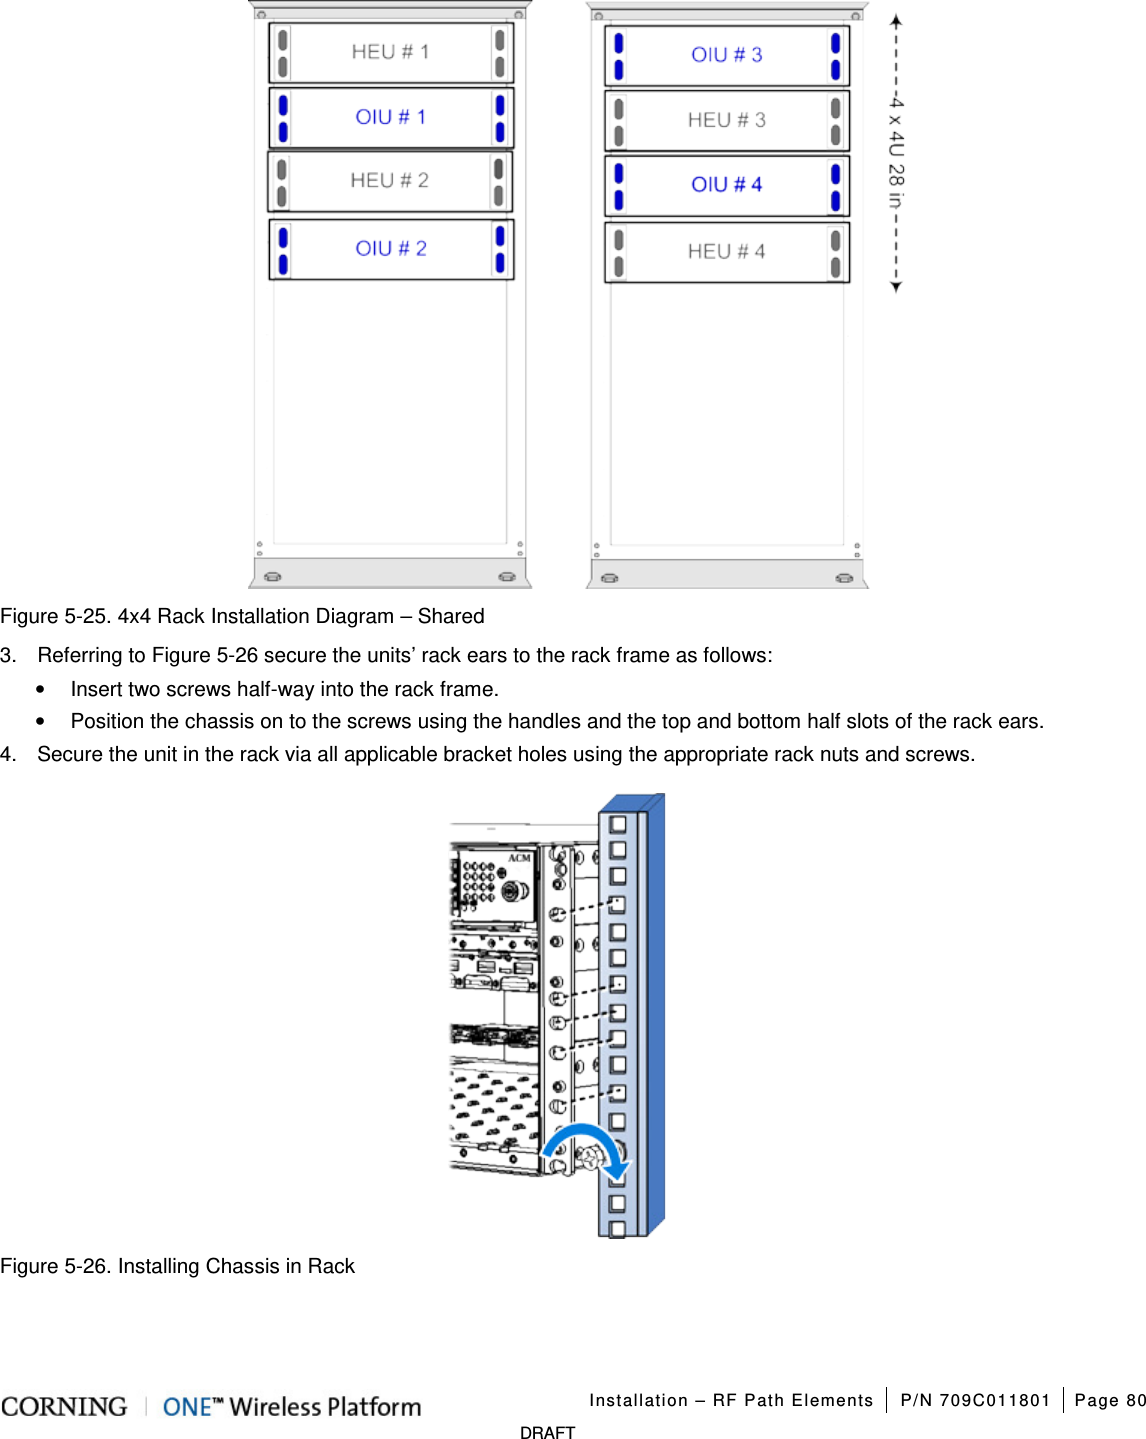   Installation – RF Path Elements P/N 709C011801 Page 80   DRAFT  Figure  5-25. 4x4 Rack Installation Diagram – Shared 3.  Referring to Figure  5-26 secure the units’ rack ears to the rack frame as follows: • Insert two screws half-way into the rack frame.   • Position the chassis on to the screws using the handles and the top and bottom half slots of the rack ears. 4.  Secure the unit in the rack via all applicable bracket holes using the appropriate rack nuts and screws.    Figure  5-26. Installing Chassis in Rack 